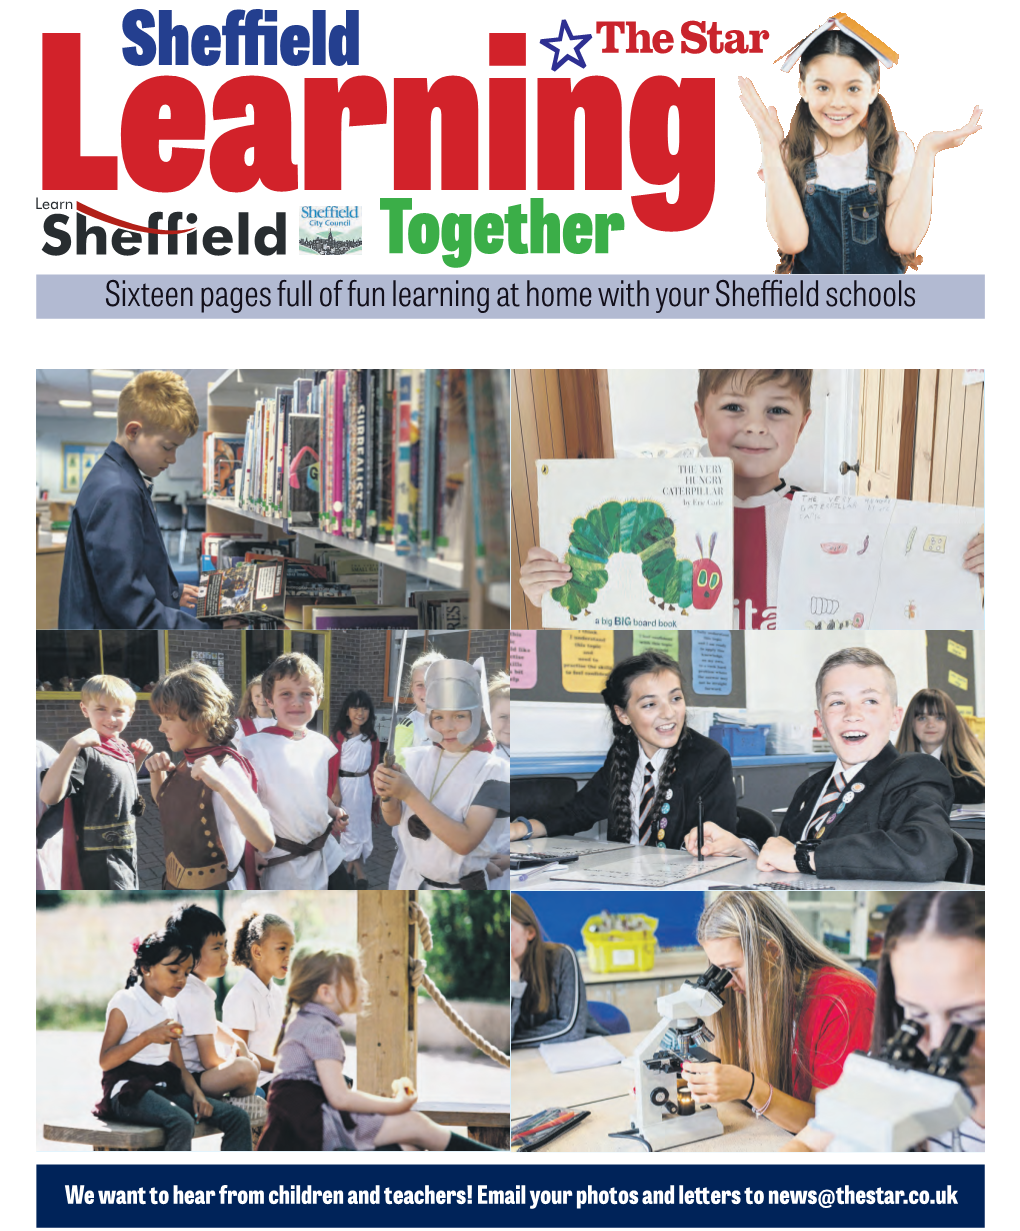 Together Sixteen Pages Full of Funlearning at Home with Your Sheﬃeld Schools